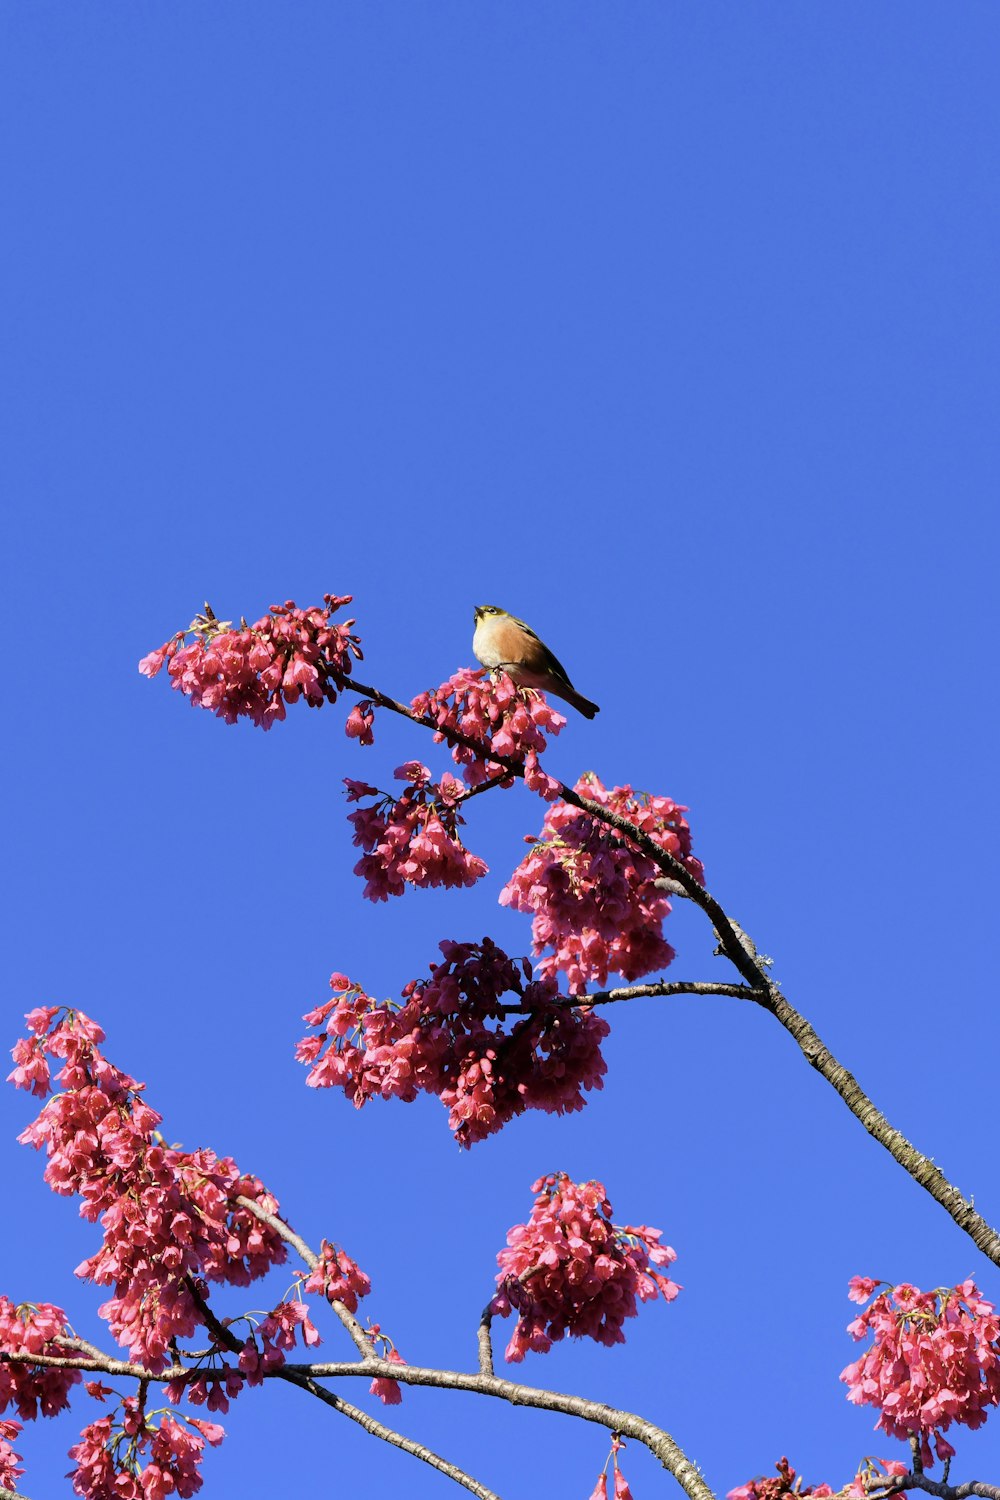 a bird perched on a branch